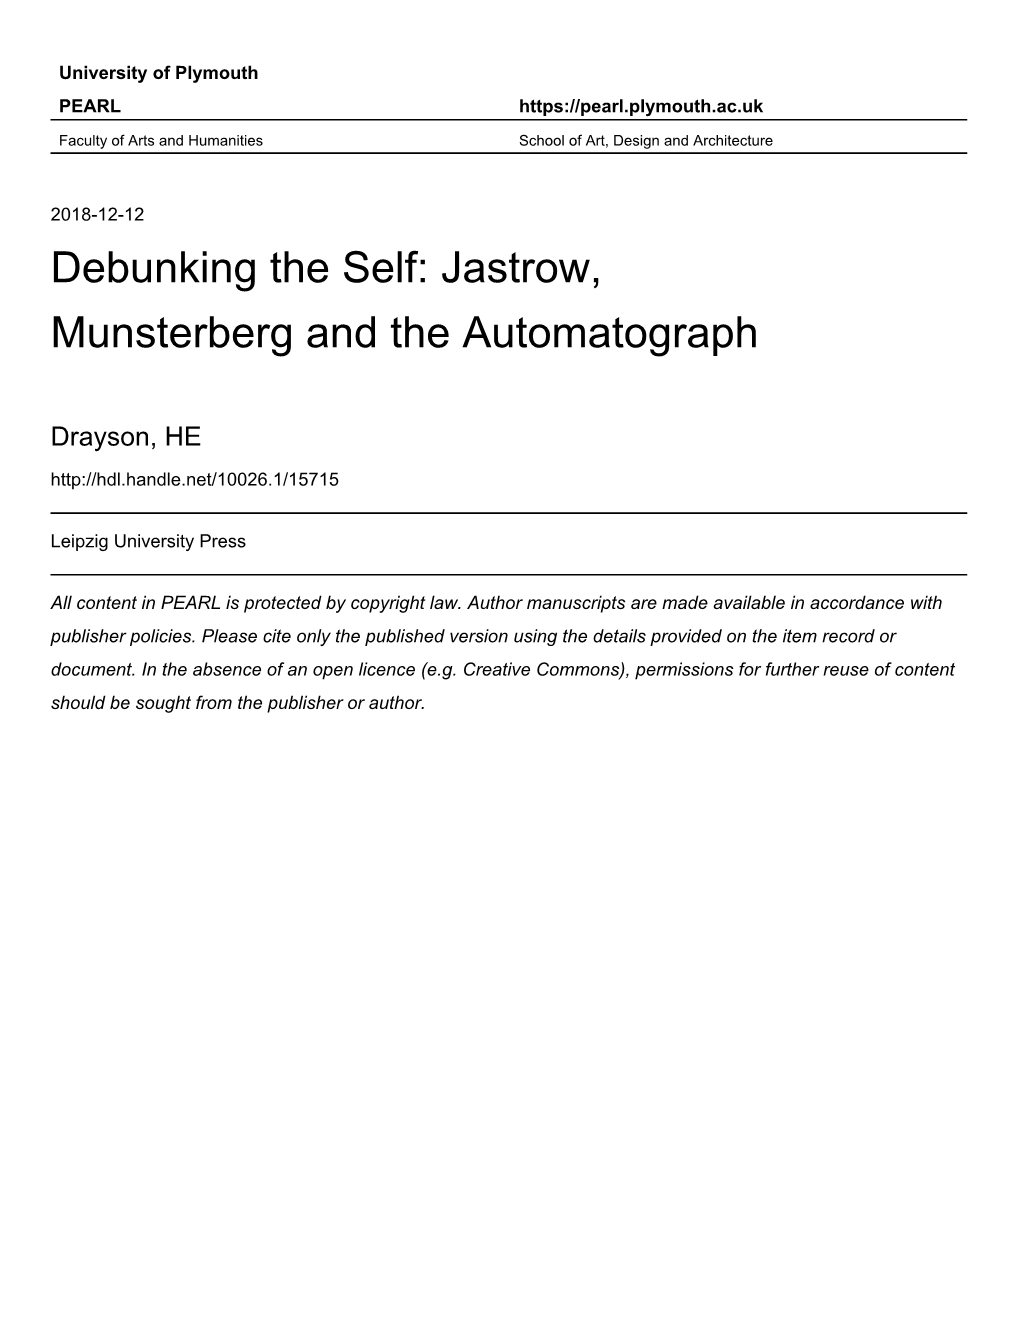 Debunking the Self; Jastrow, Münsterberg and the Automatograph